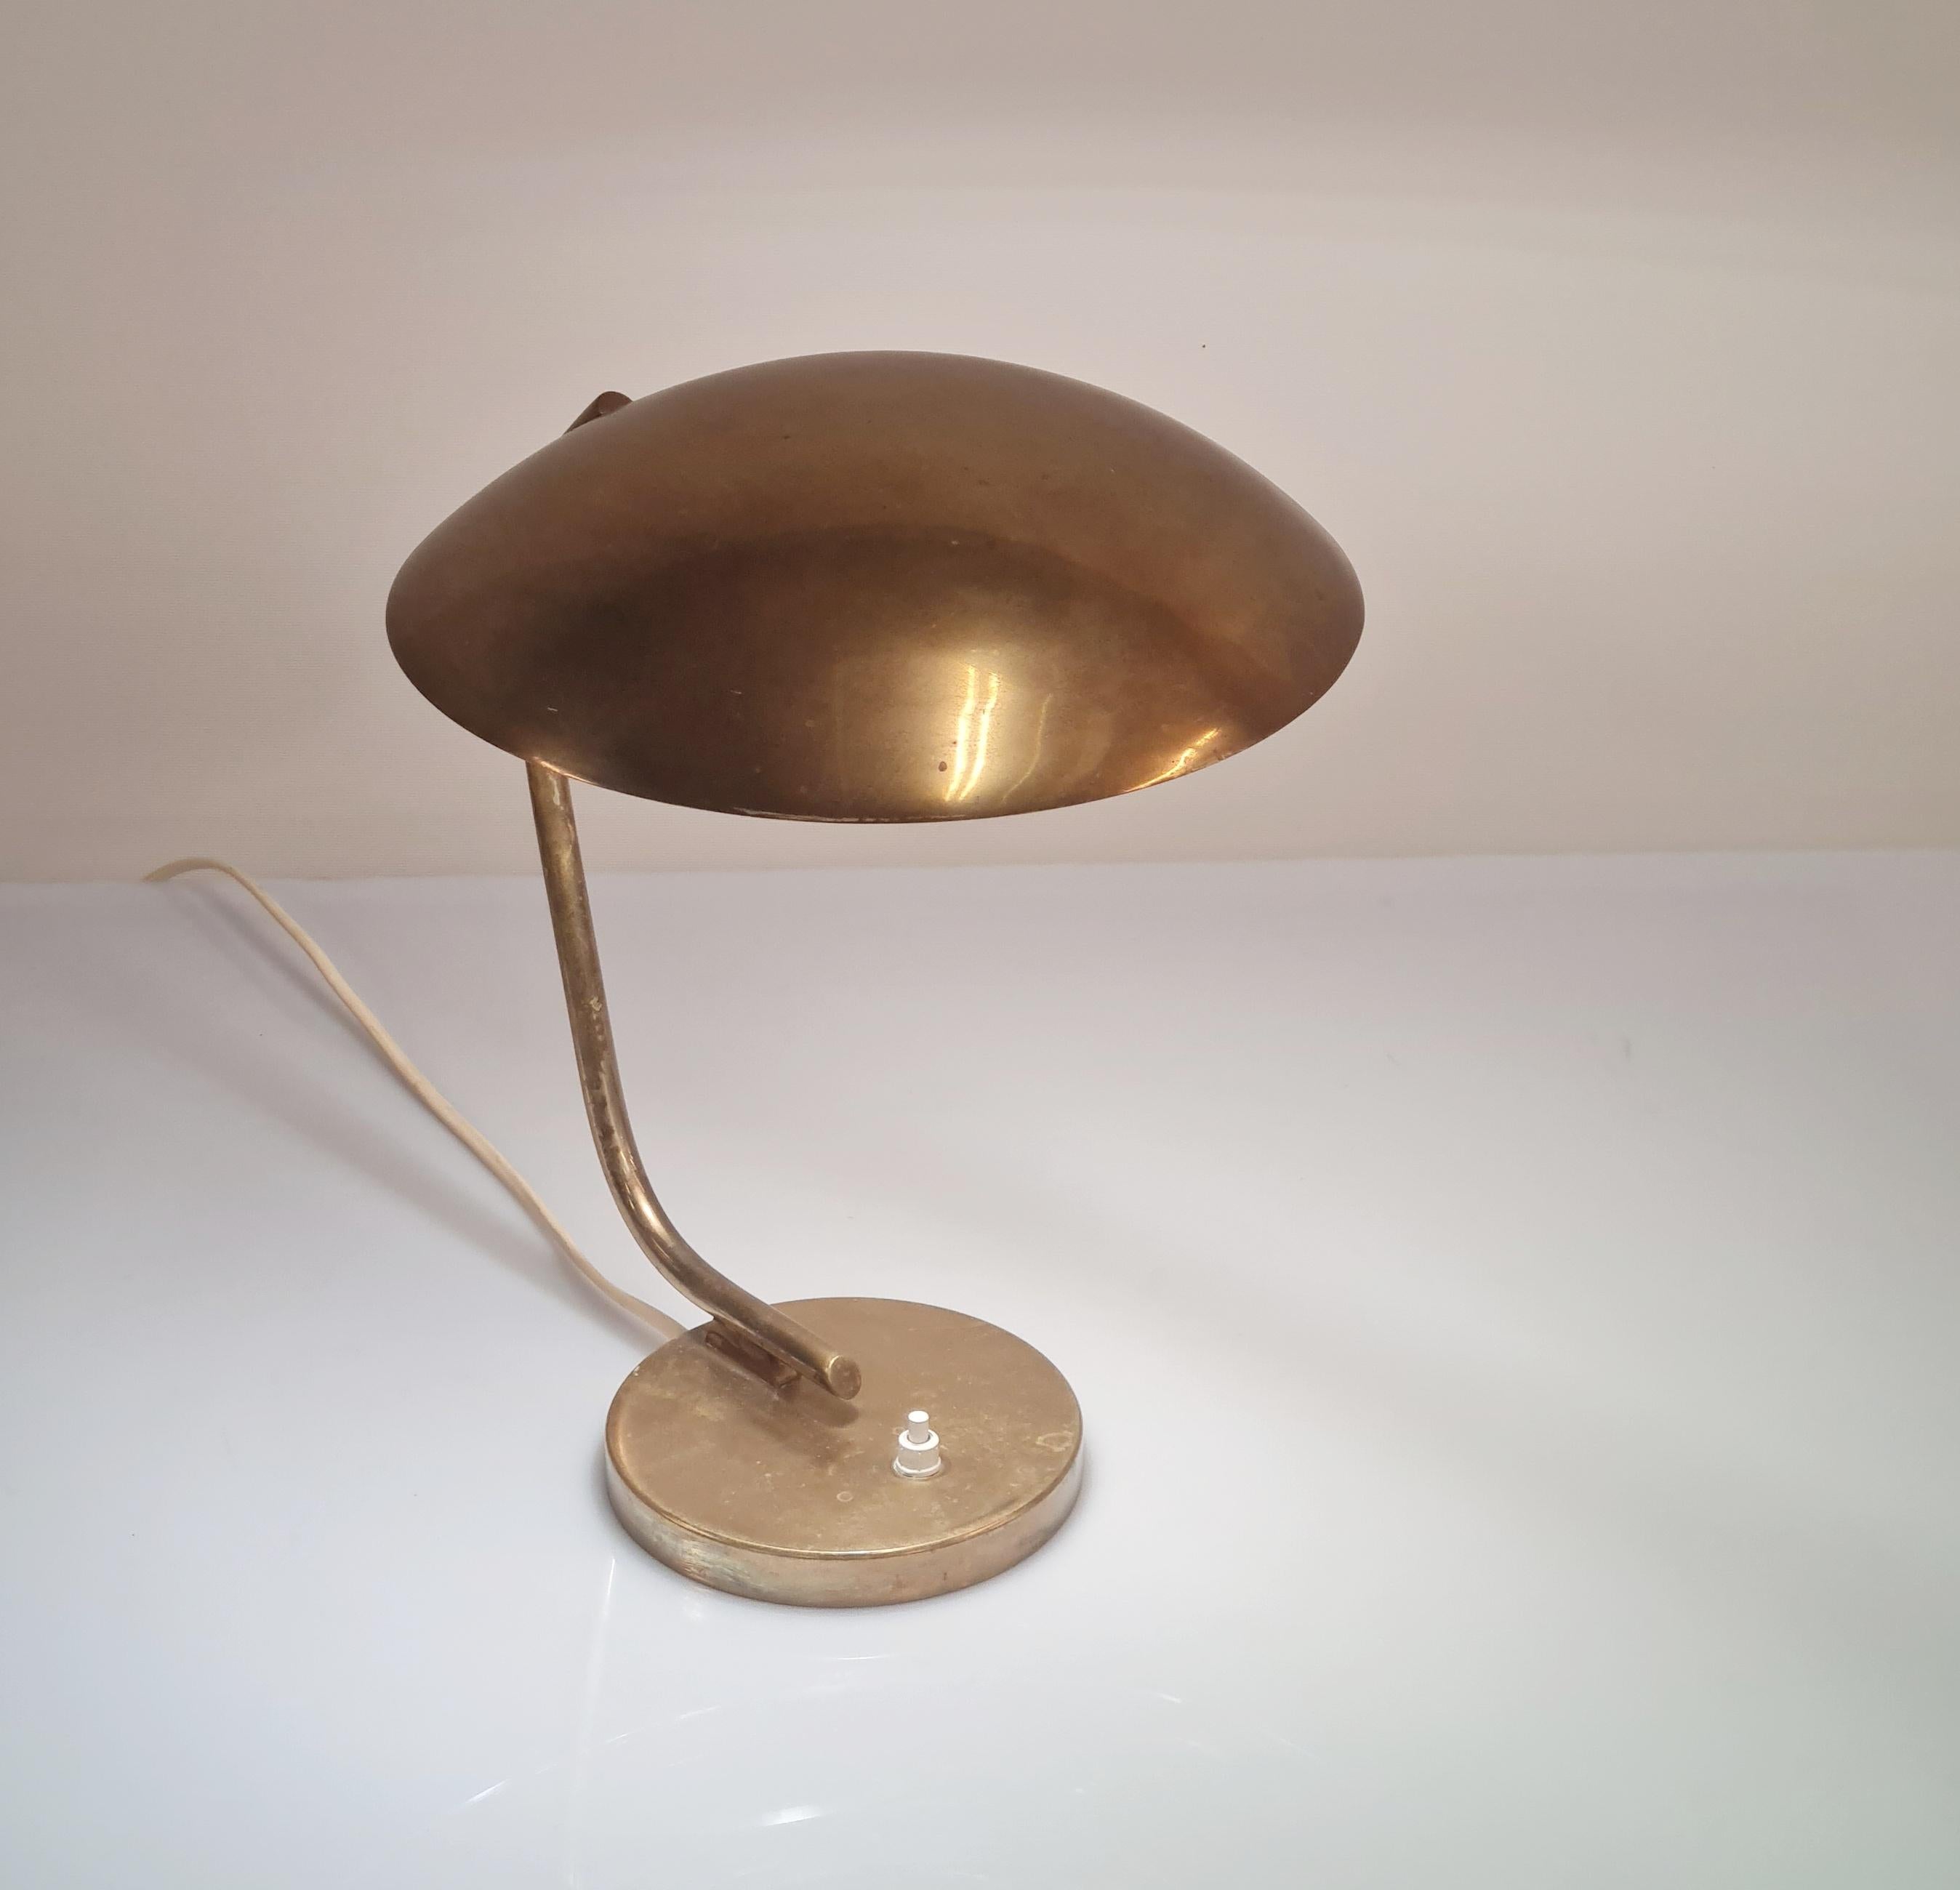 This table lamp is quite retro in style and we don´t come across this model often.  So if you are looking for a lamp that your neighbour will not have for sure, here you go, this is it. 

This is of course a fully documented model in the 1950s Itsu